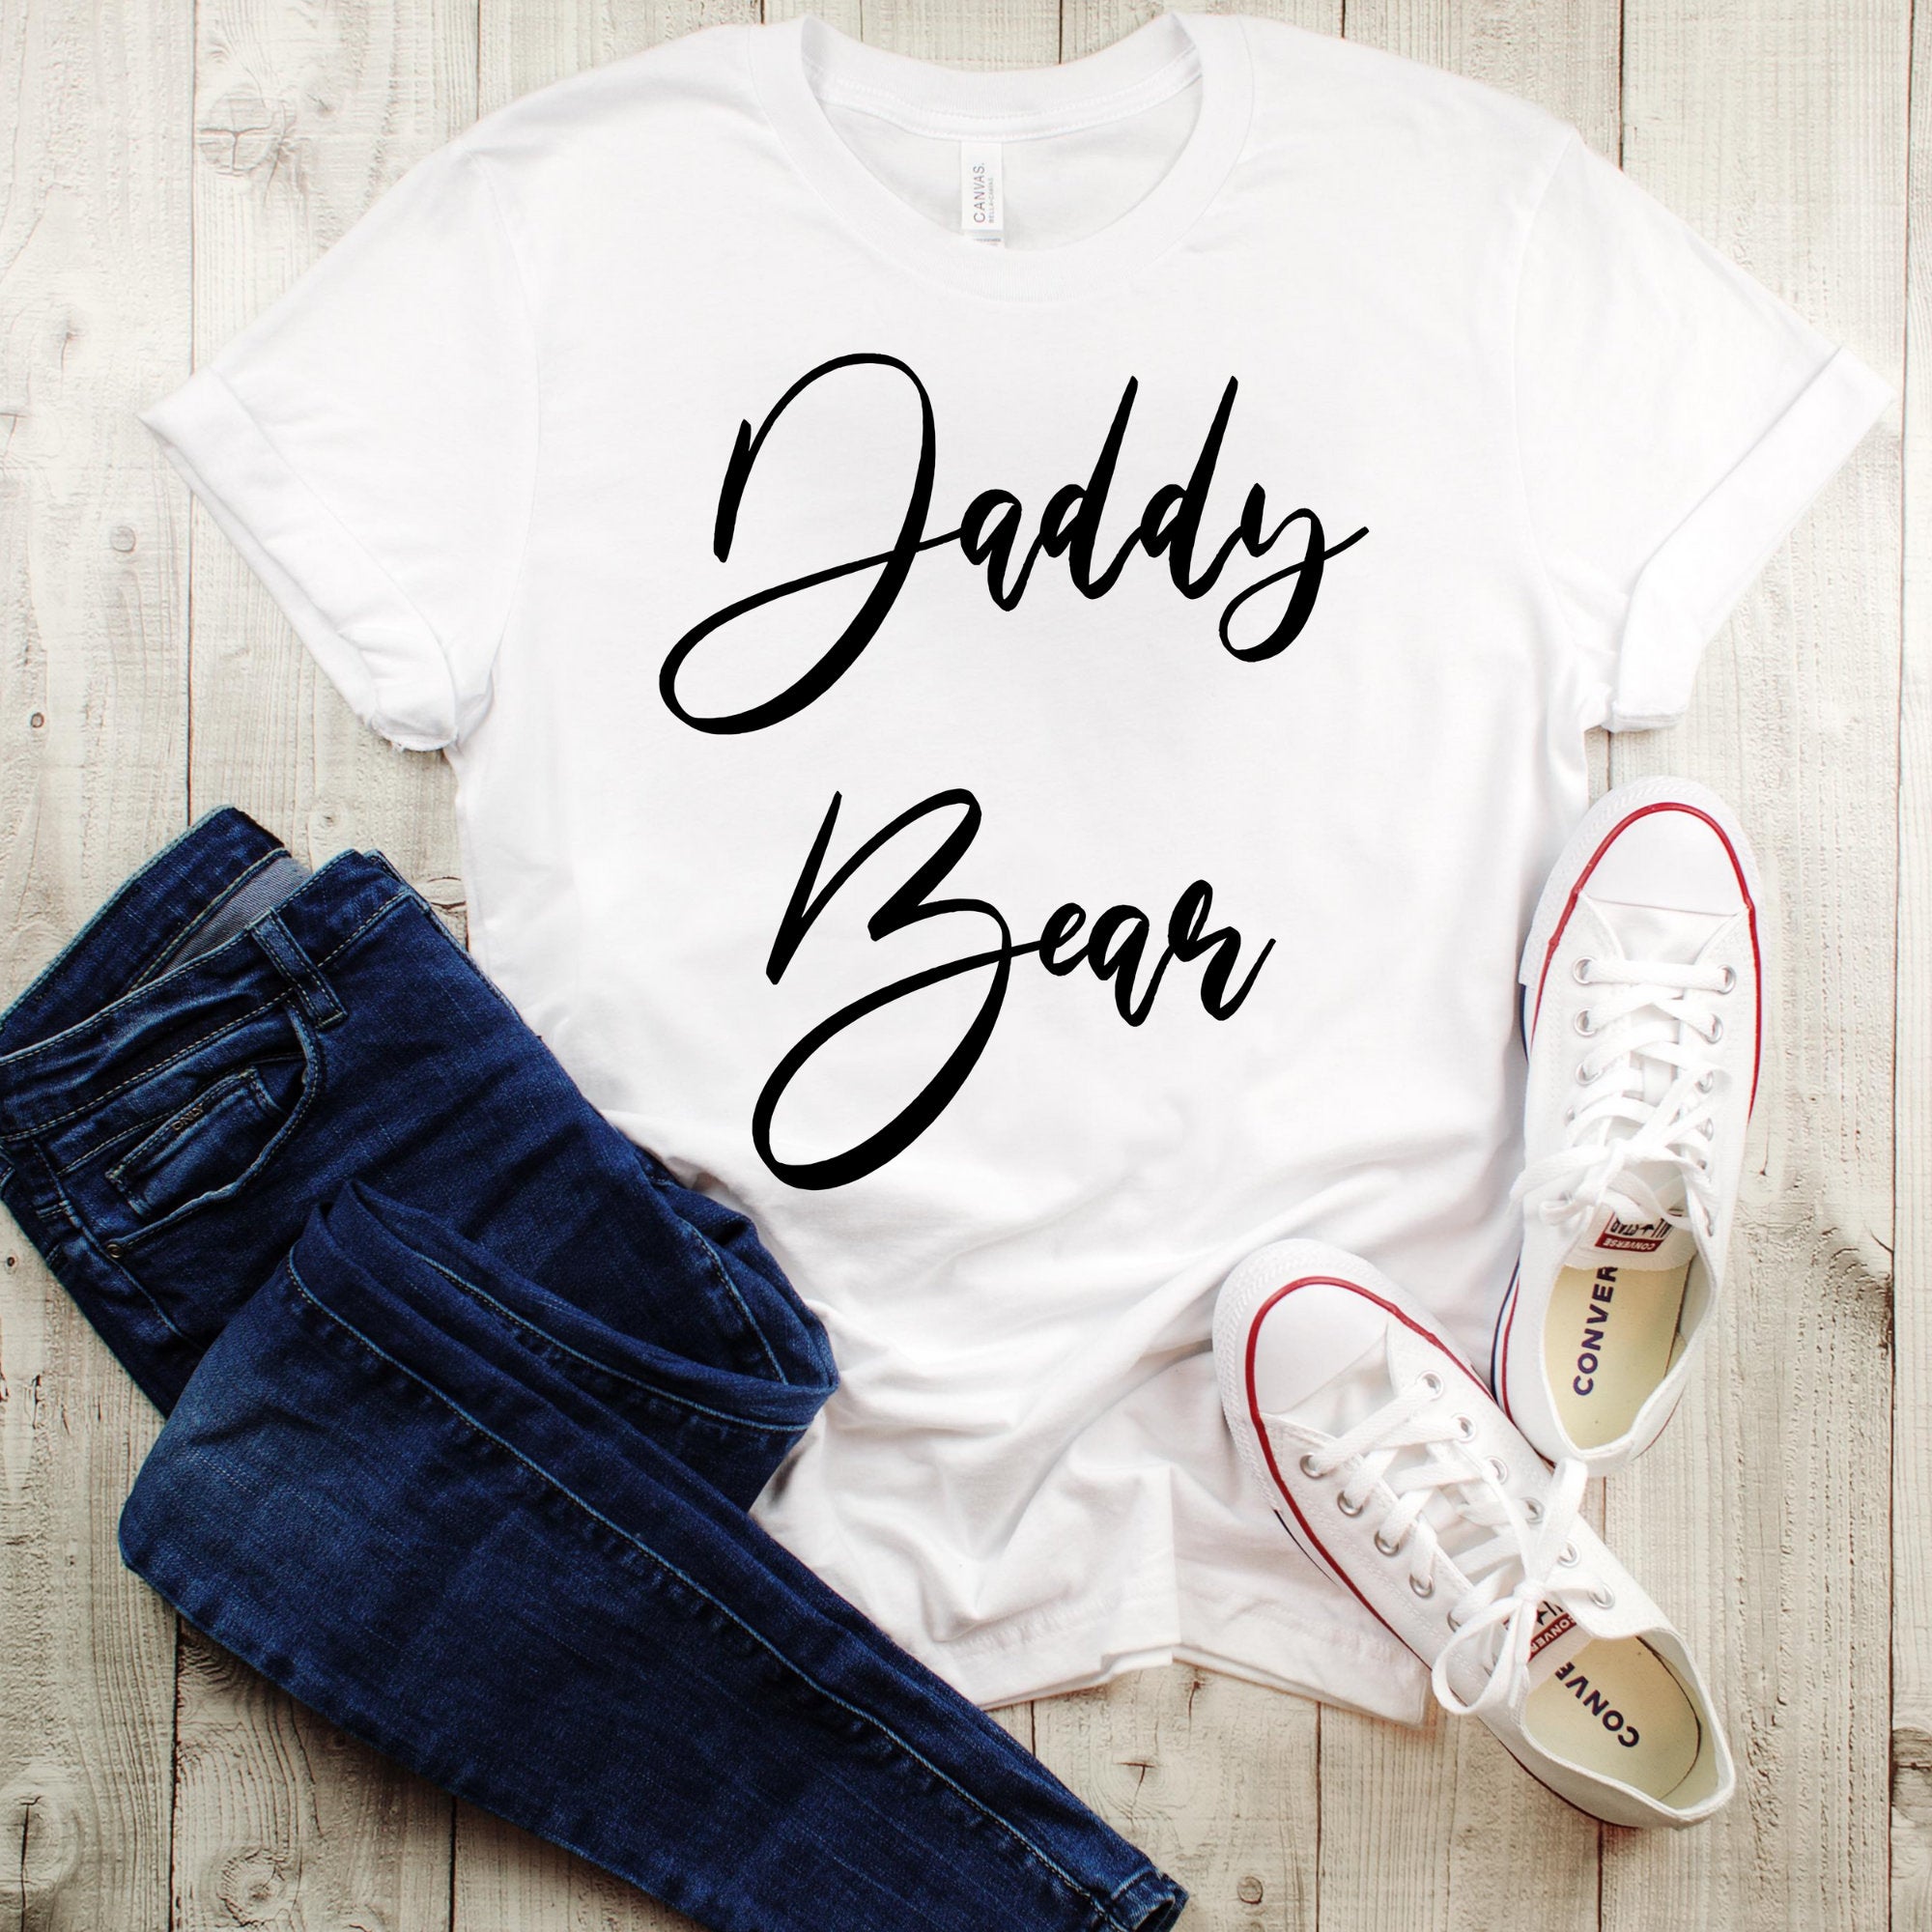 Daddy Bear Mens Tee & Baby Bear Toddler/Infant Tee Father daughter Matching Shirts Father Son Matching Shirts - MamaBuzz Creations